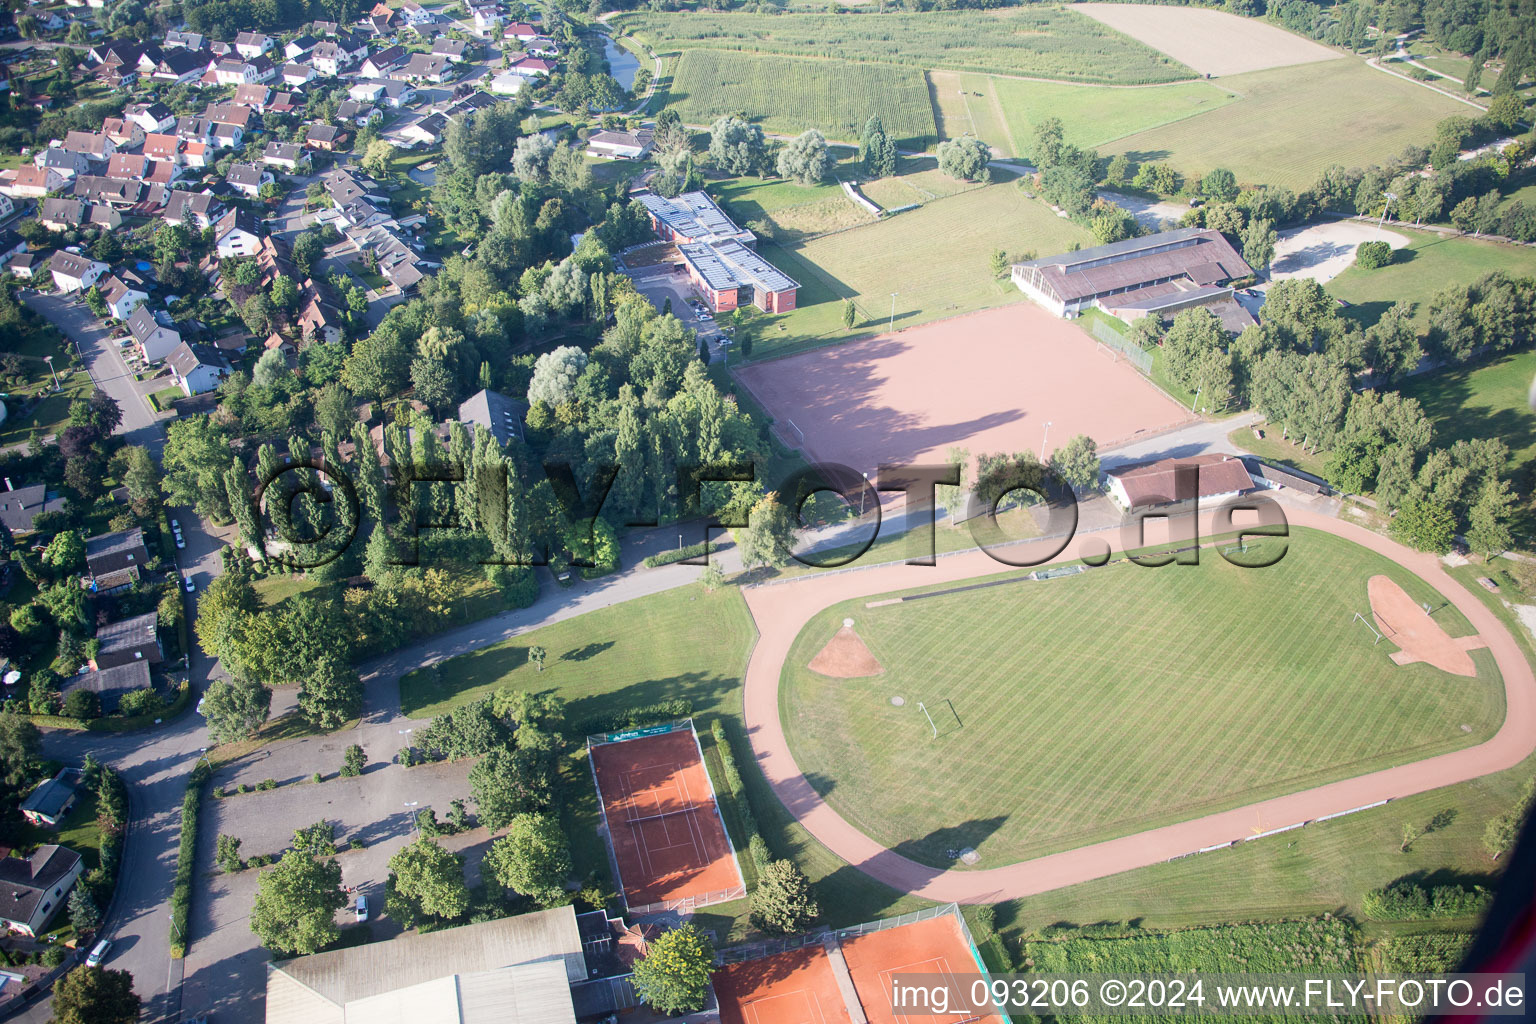 Meißenheim in the state Baden-Wuerttemberg, Germany from above